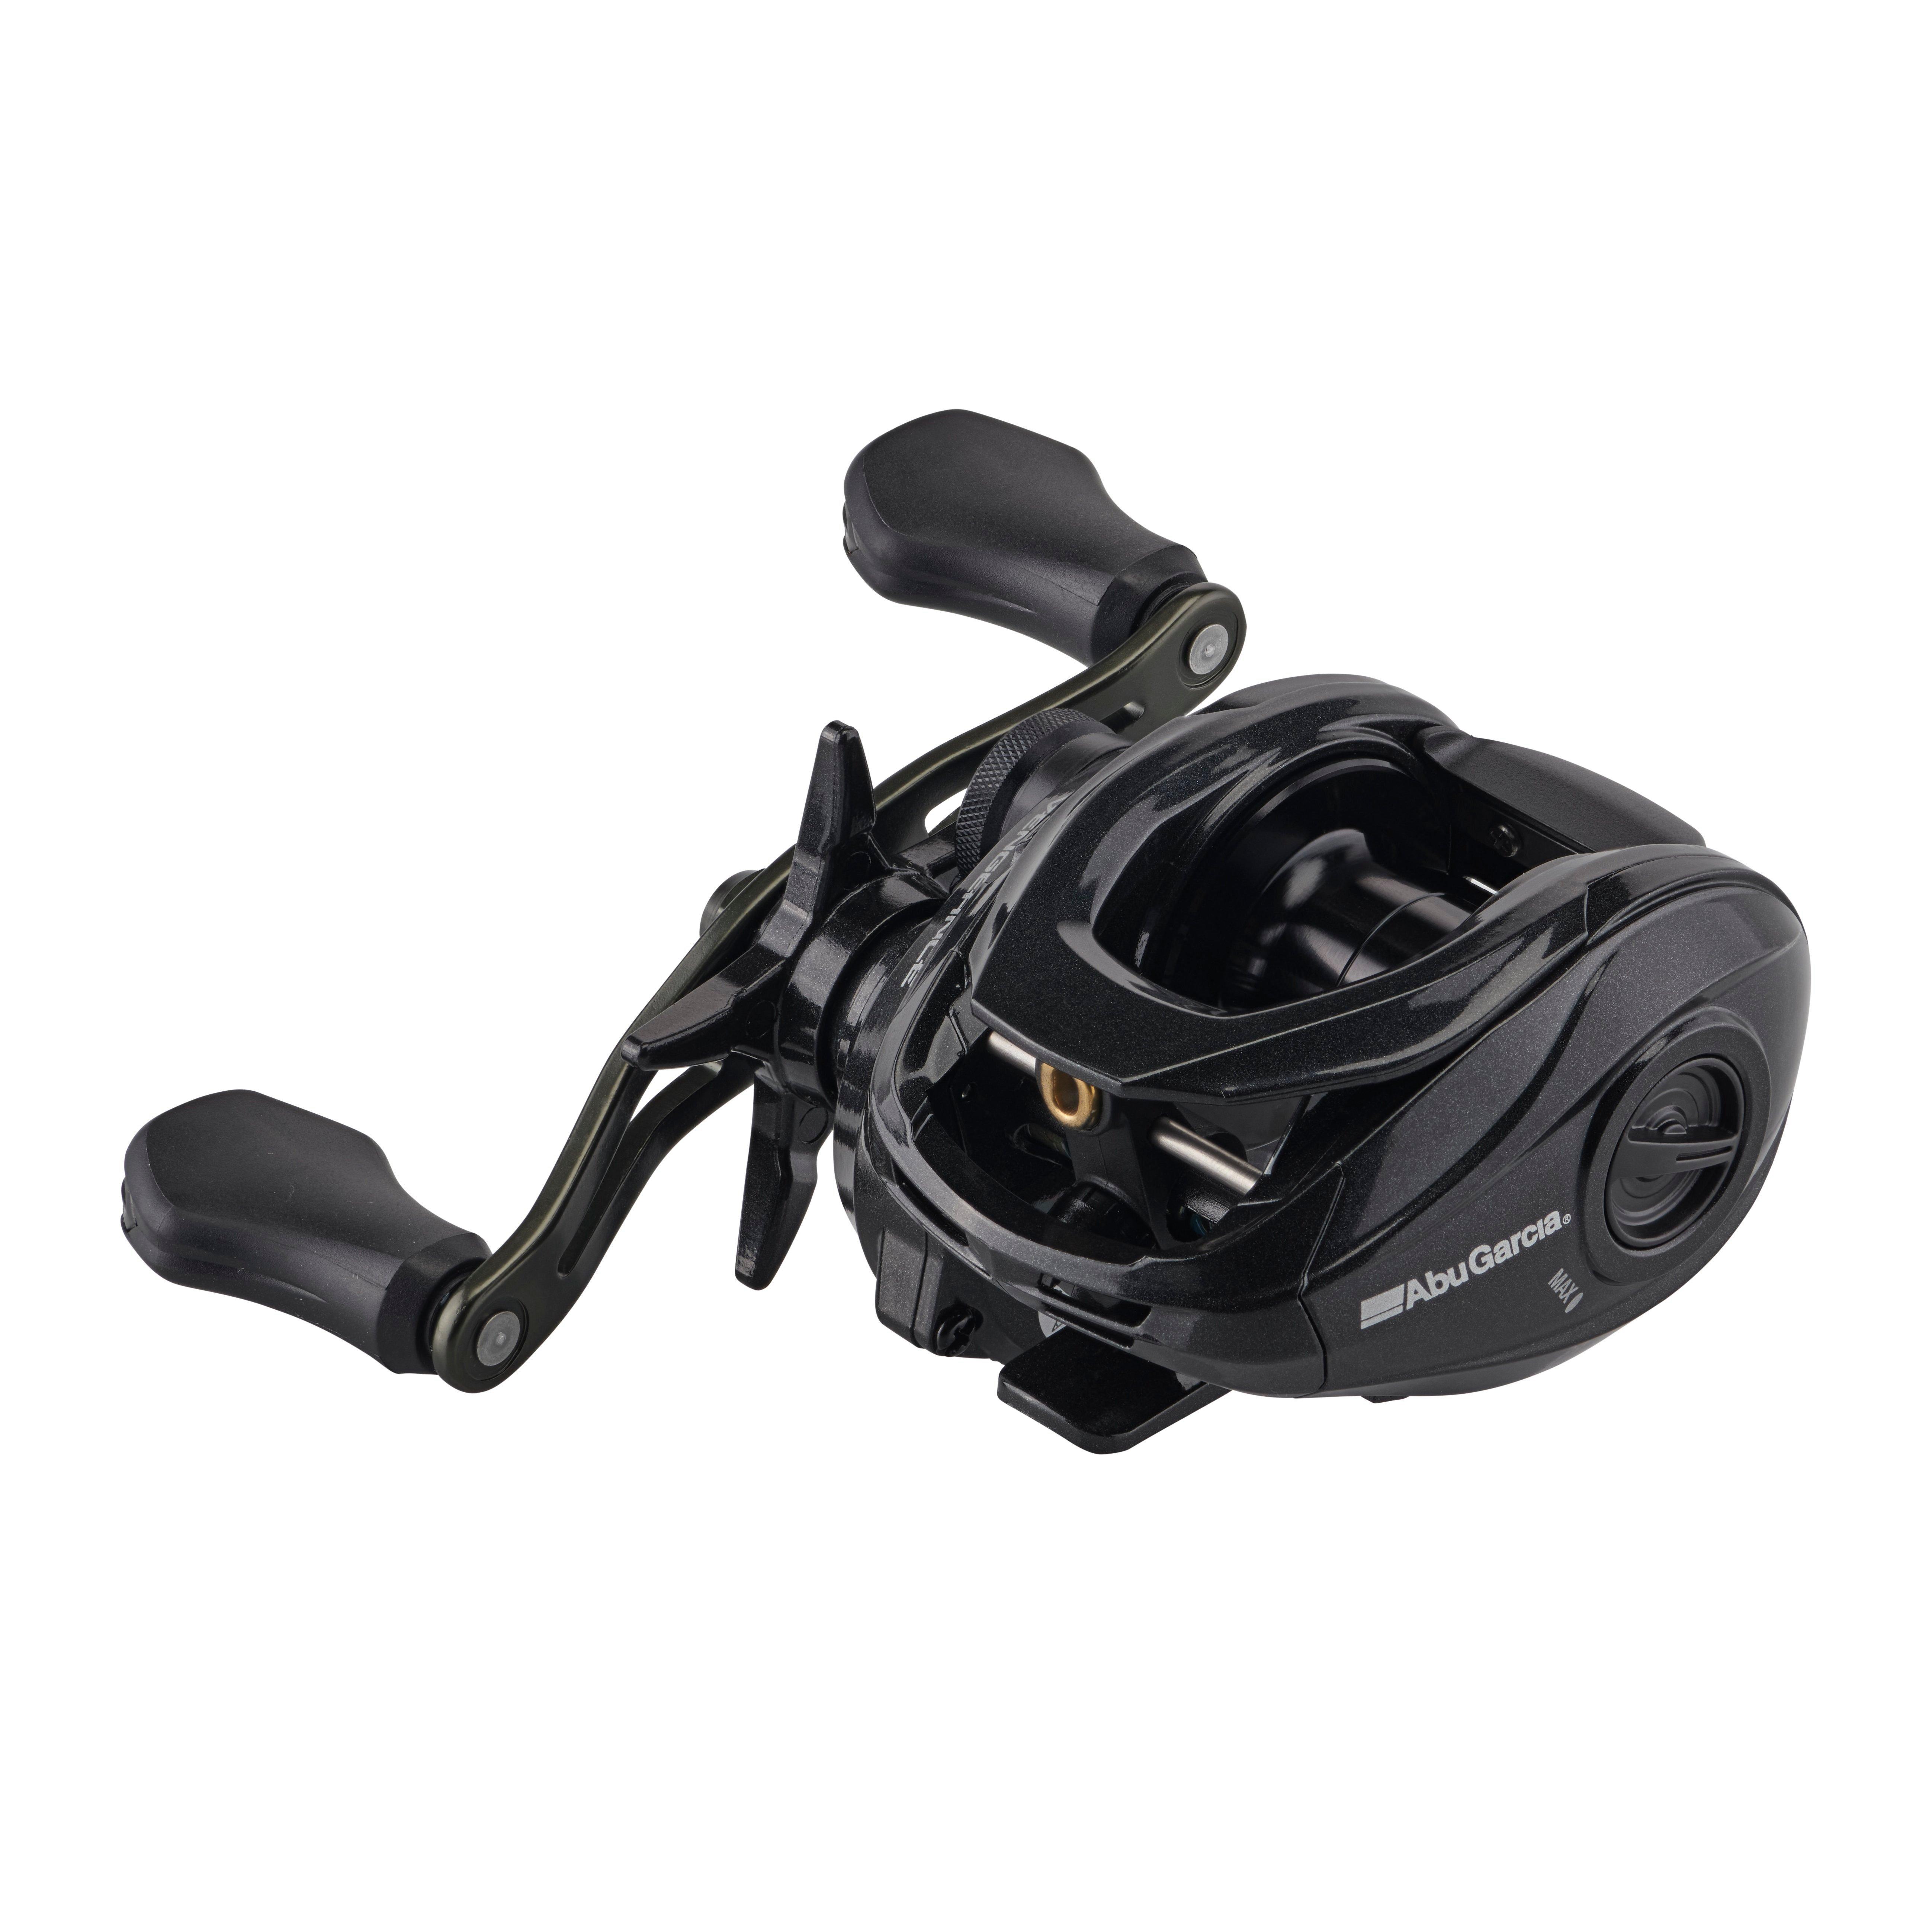 Abu Garcia Reels Online In Stock For The Best Price At Nootica - Nootica -  Water addicts, like you!